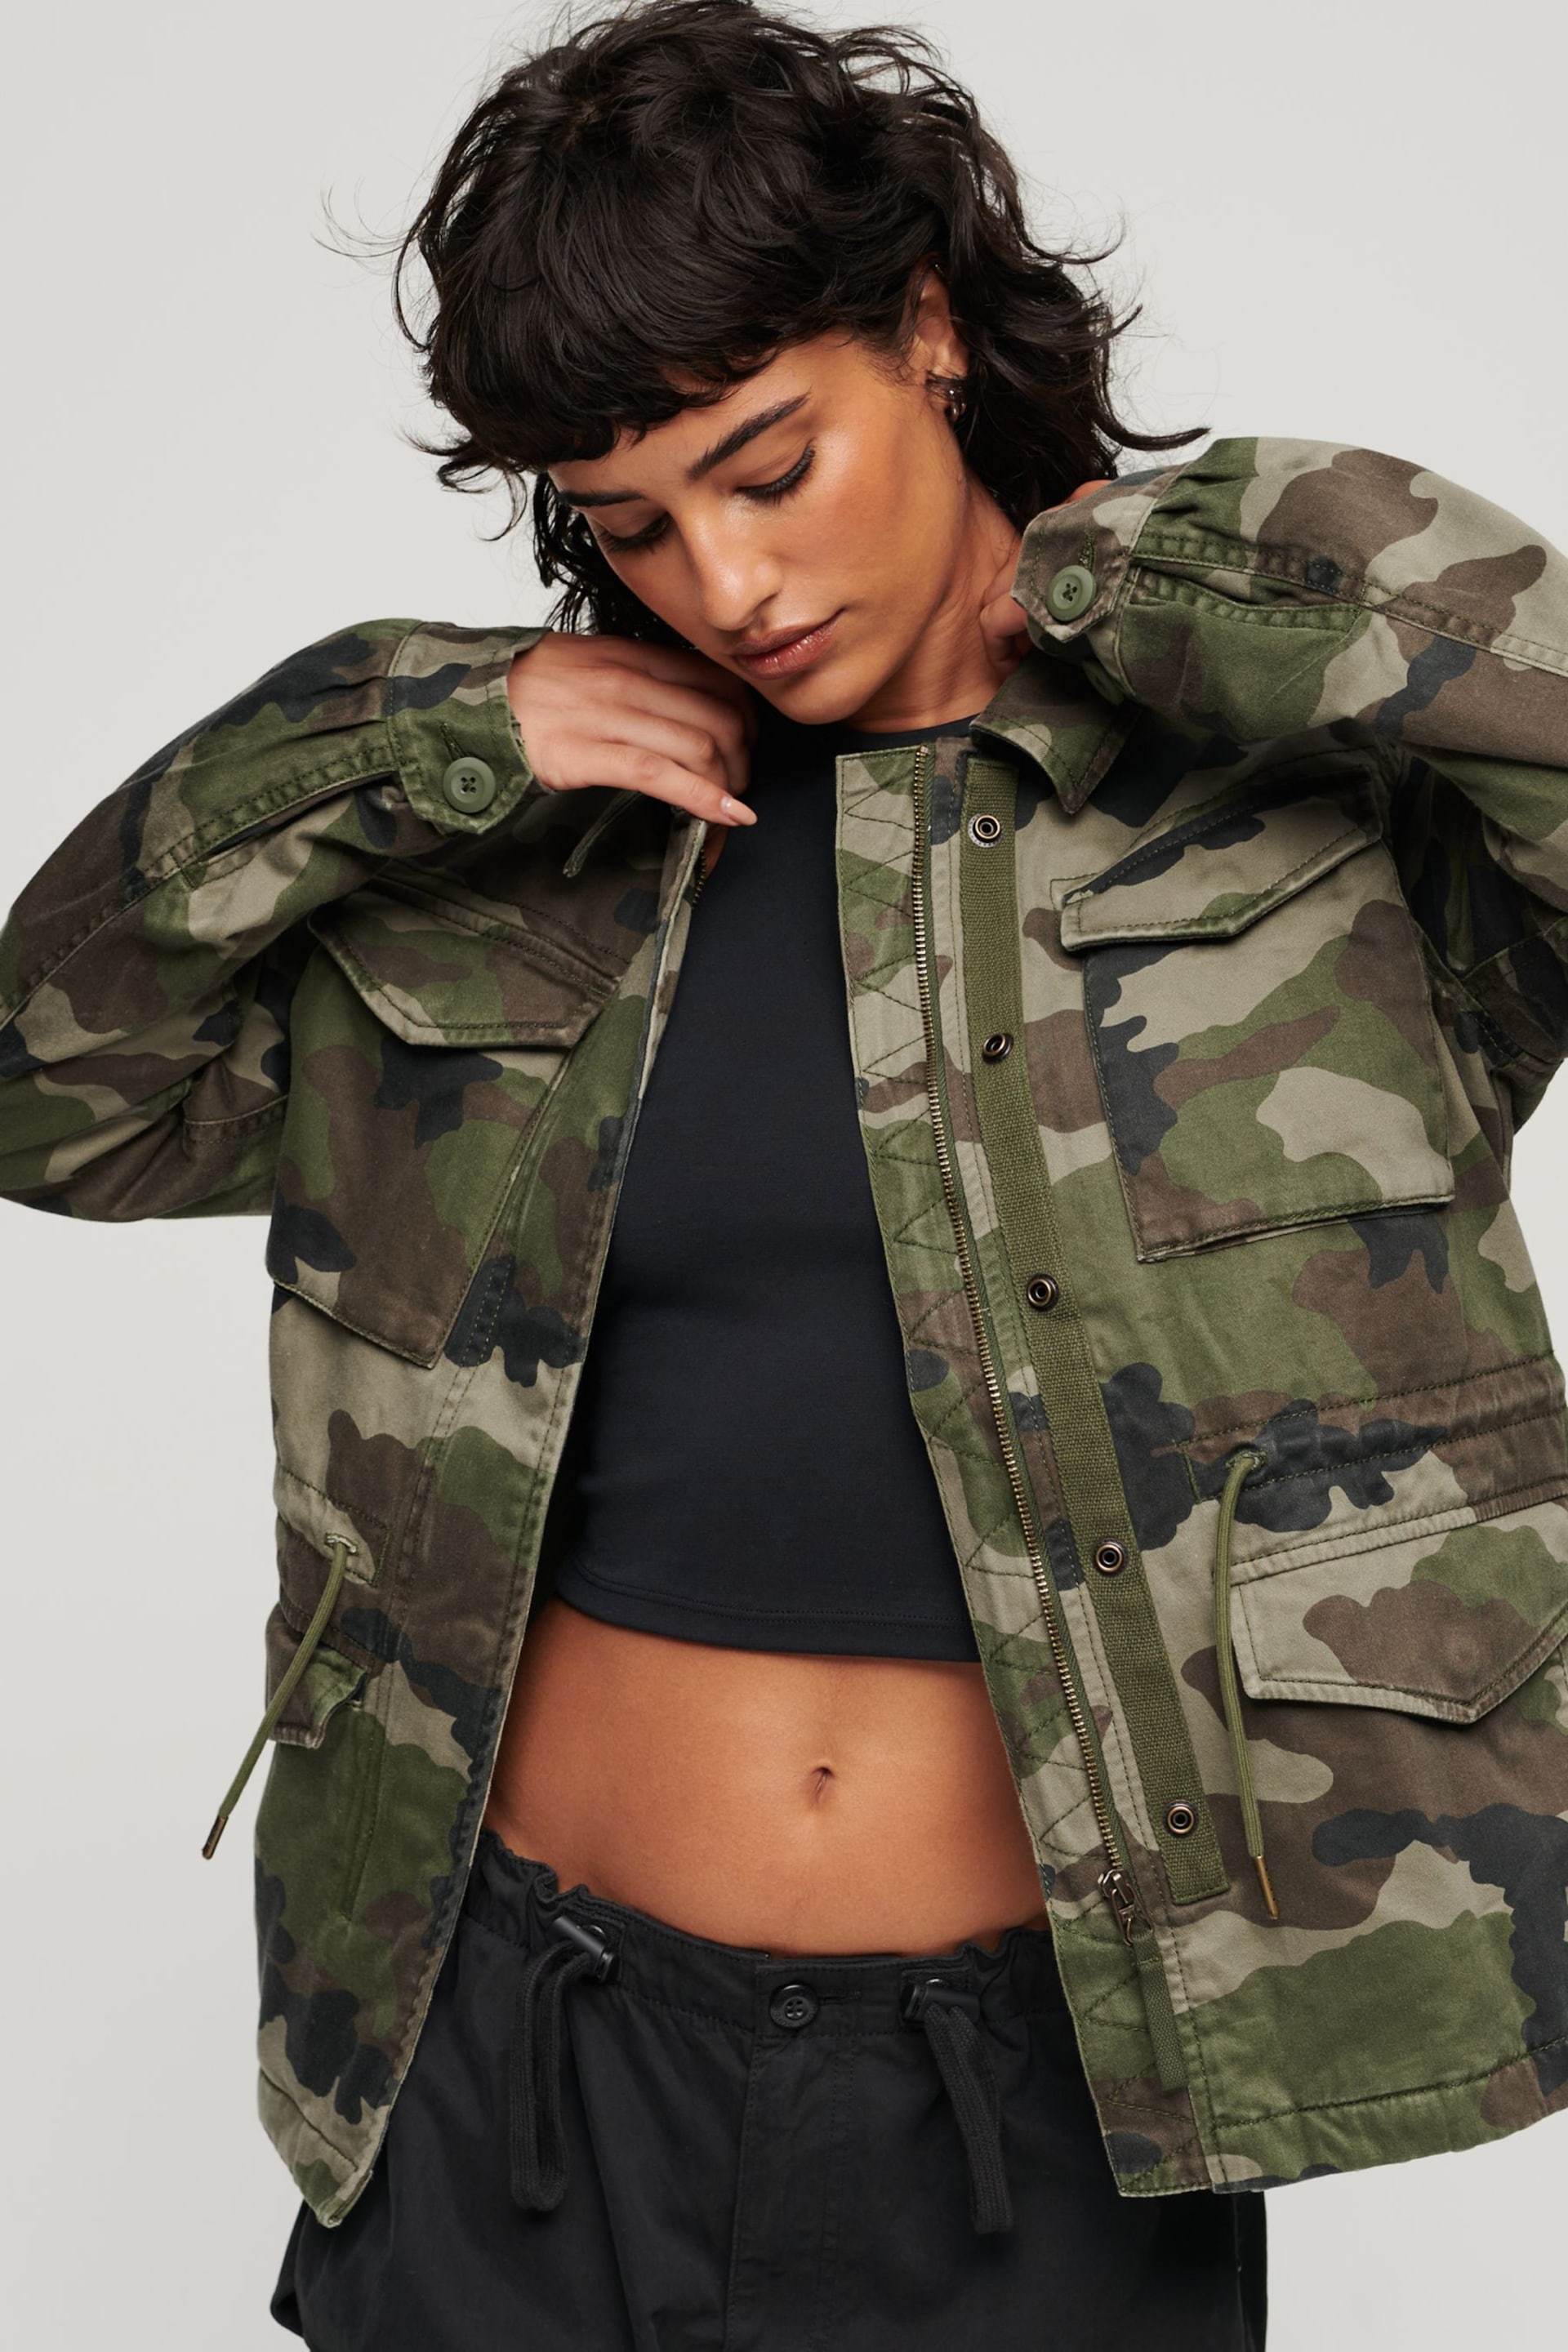 Superdry Green Military M65 Jacket - Image 1 of 5